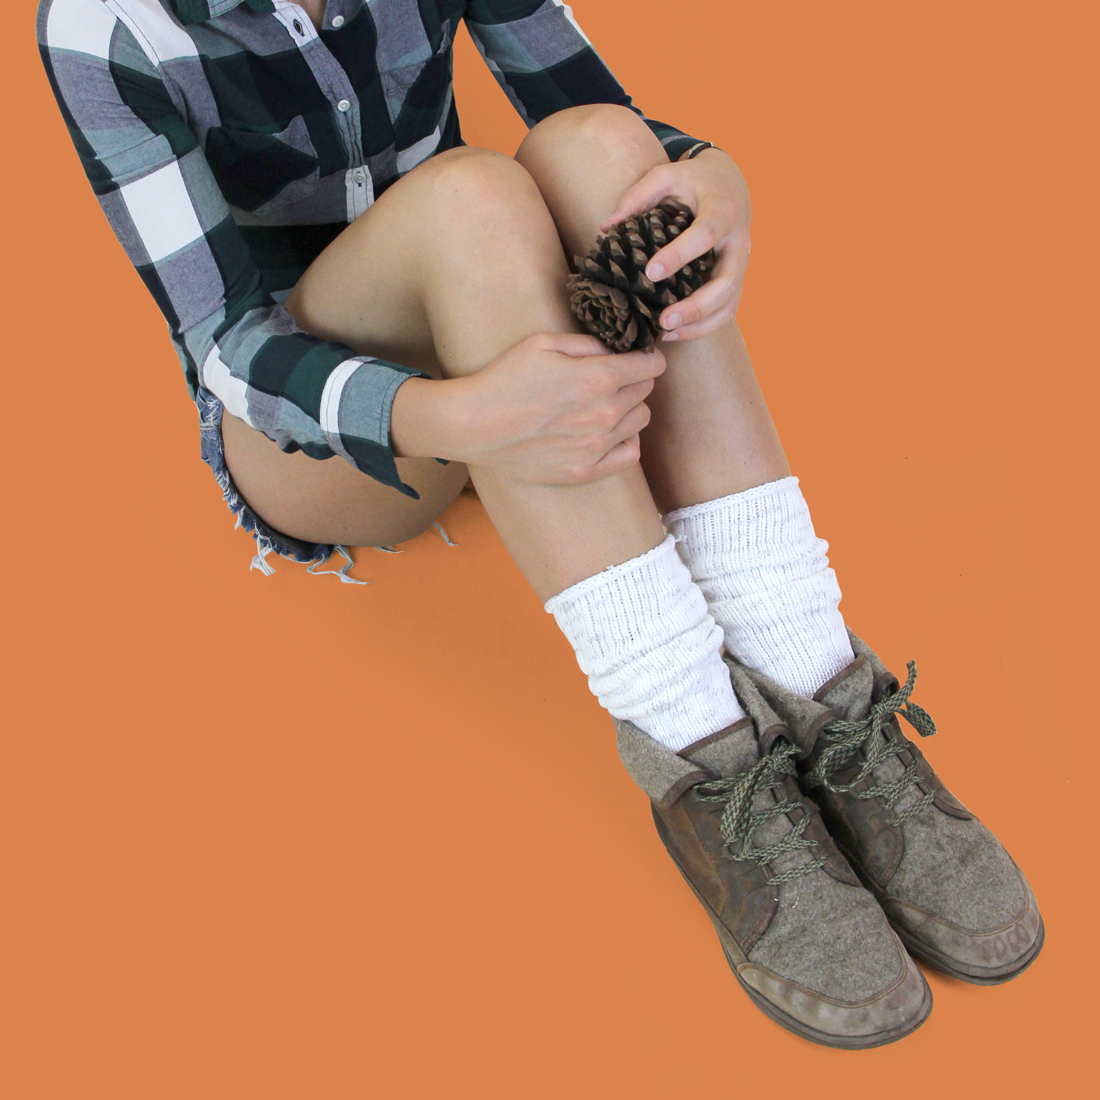 Cotton rag boot socks on a model in hiking boots, shorts, and a flannel shirt holding a pinecone.